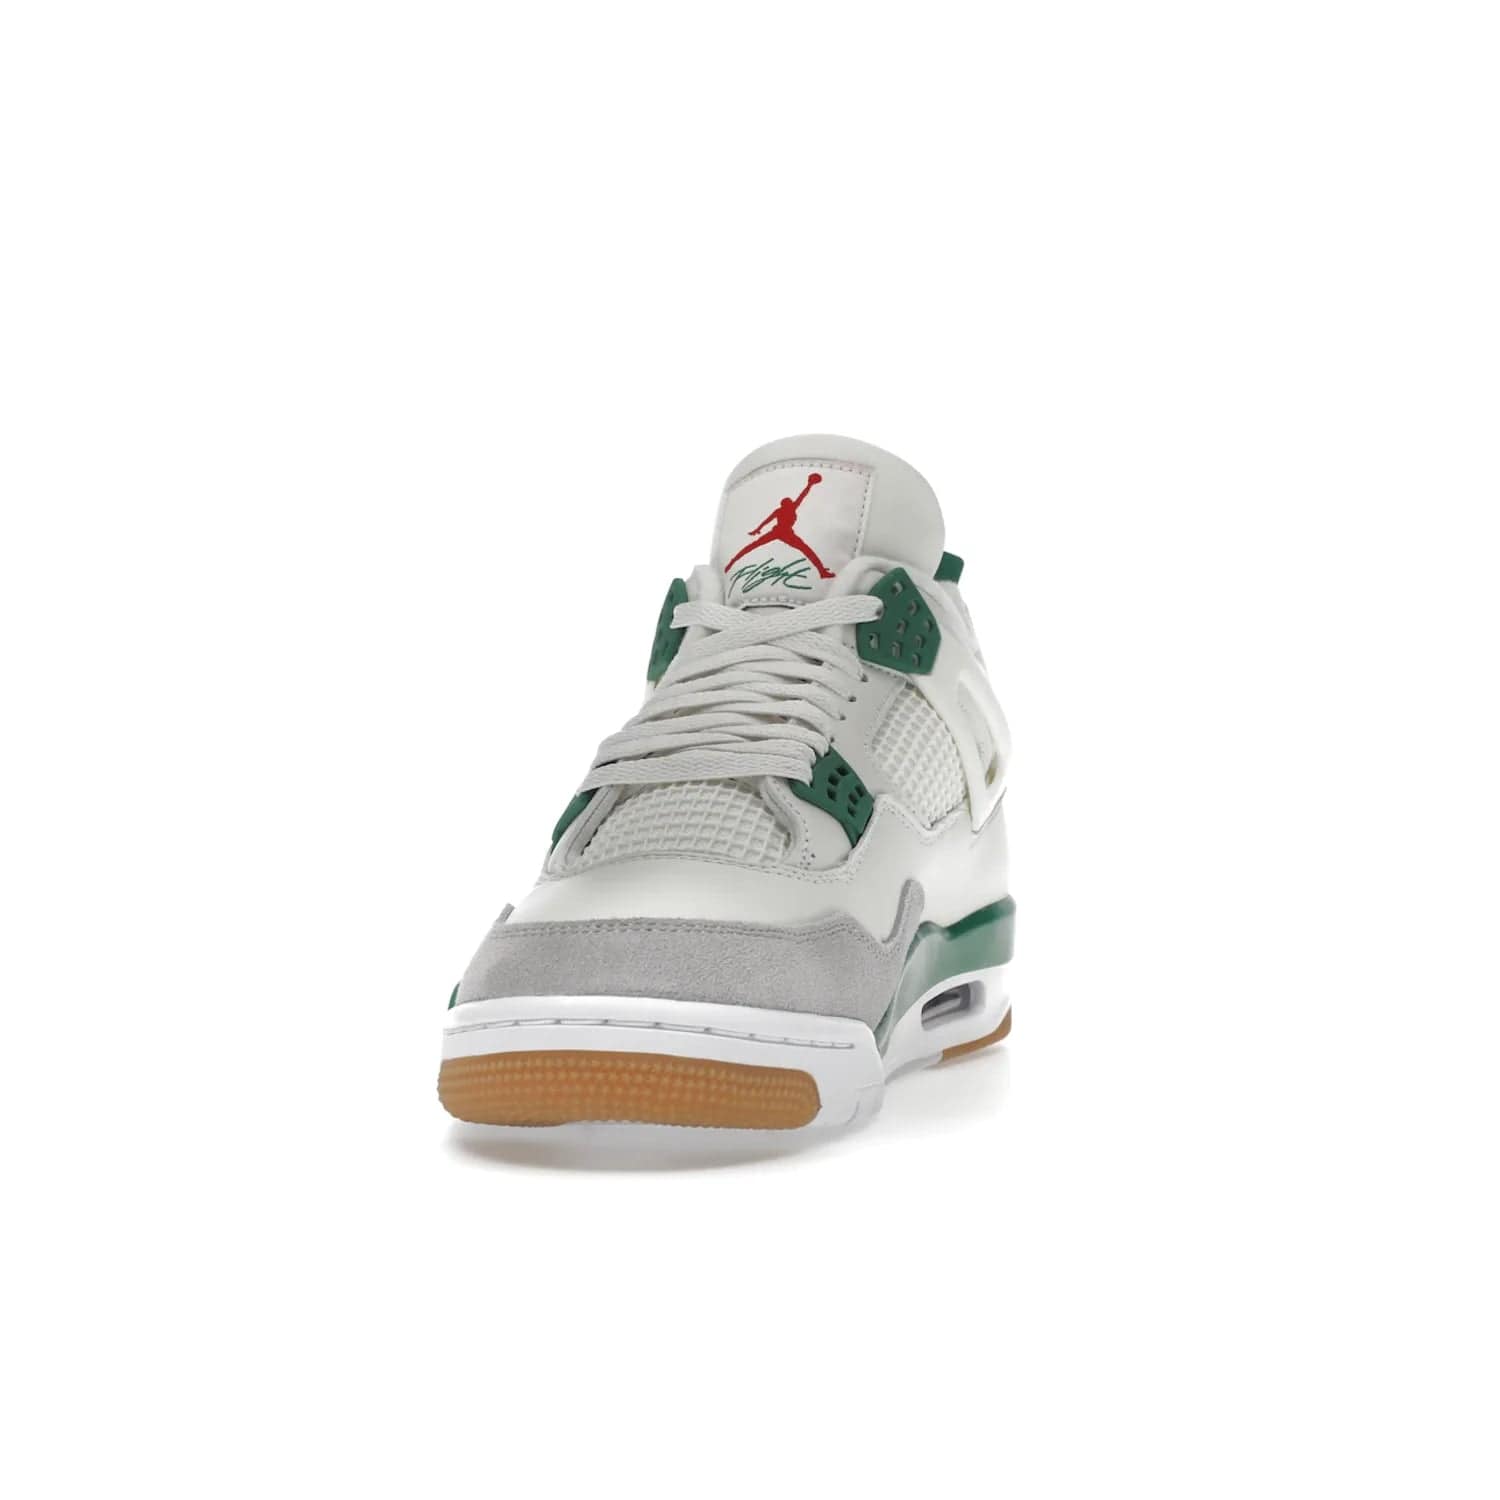 Jordan 4 Retro SB Pine Green - Image 12 - Only at www.BallersClubKickz.com - A white leather upper combined with a Neutral Grey suede mudguard gives this limited Air Jordan 4 Retro SB Pine Green sneaker its unmistakable style. Released March 20, 2023, the Jordan 4 Retro SB features a white and Pine Green midsole plus a red air unit with a gum outsole for grip. The perfect blend of Nike SB skateboarding and Jordan 4 classic design.